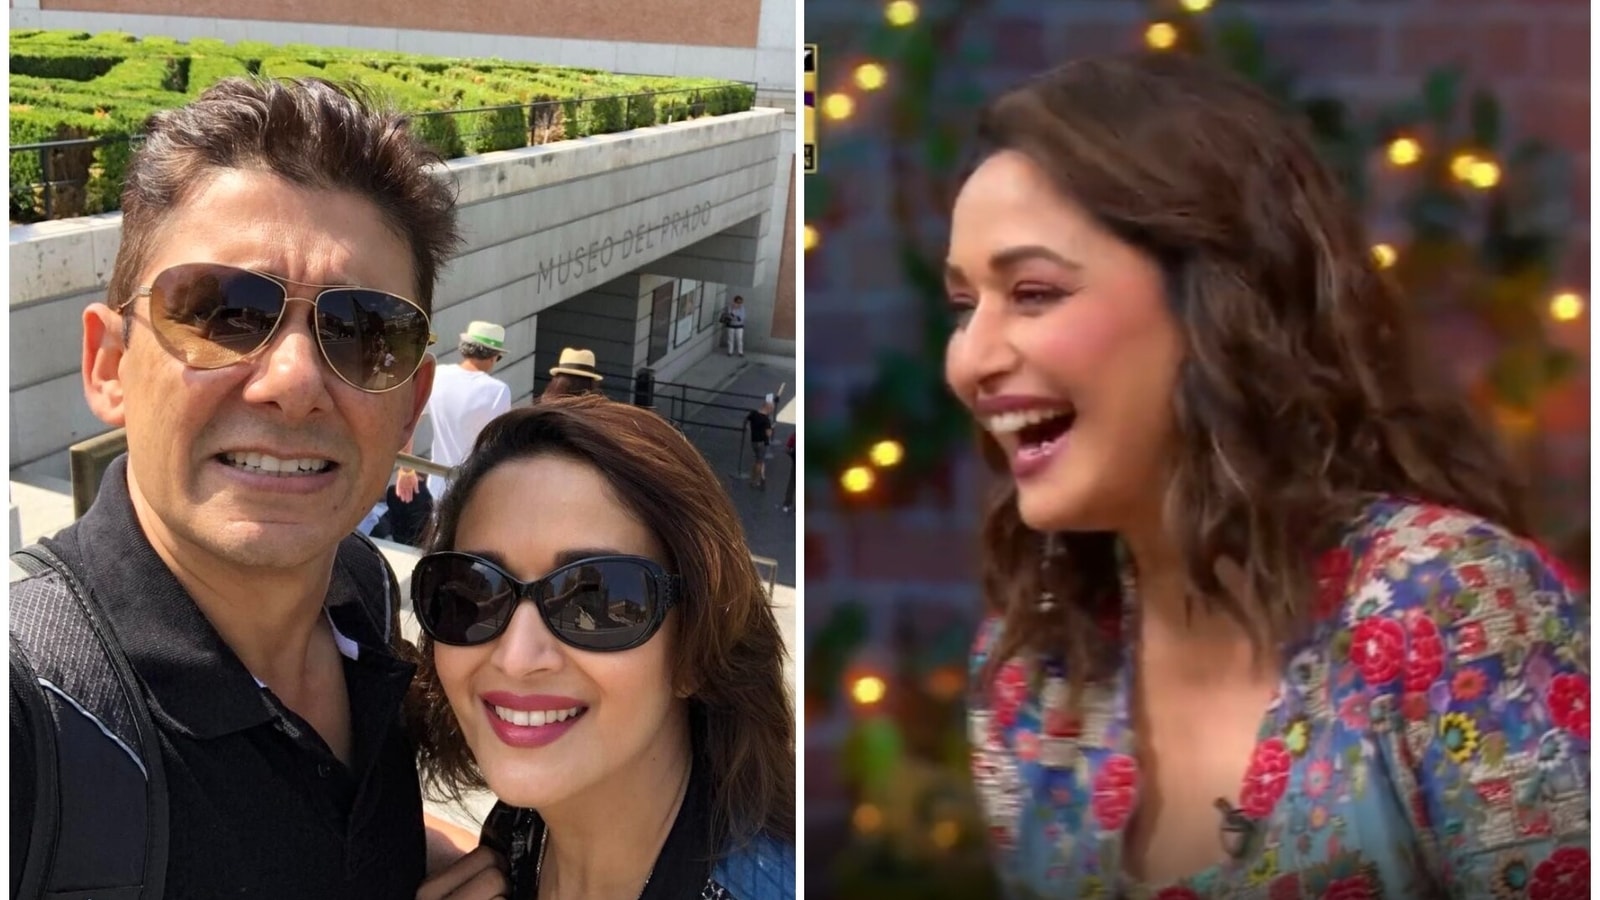 Madhuri Dixit laughs as Kapil Sharma jokes about her husband Dr Shriram Nene’s reaction to holding her hand. Watch